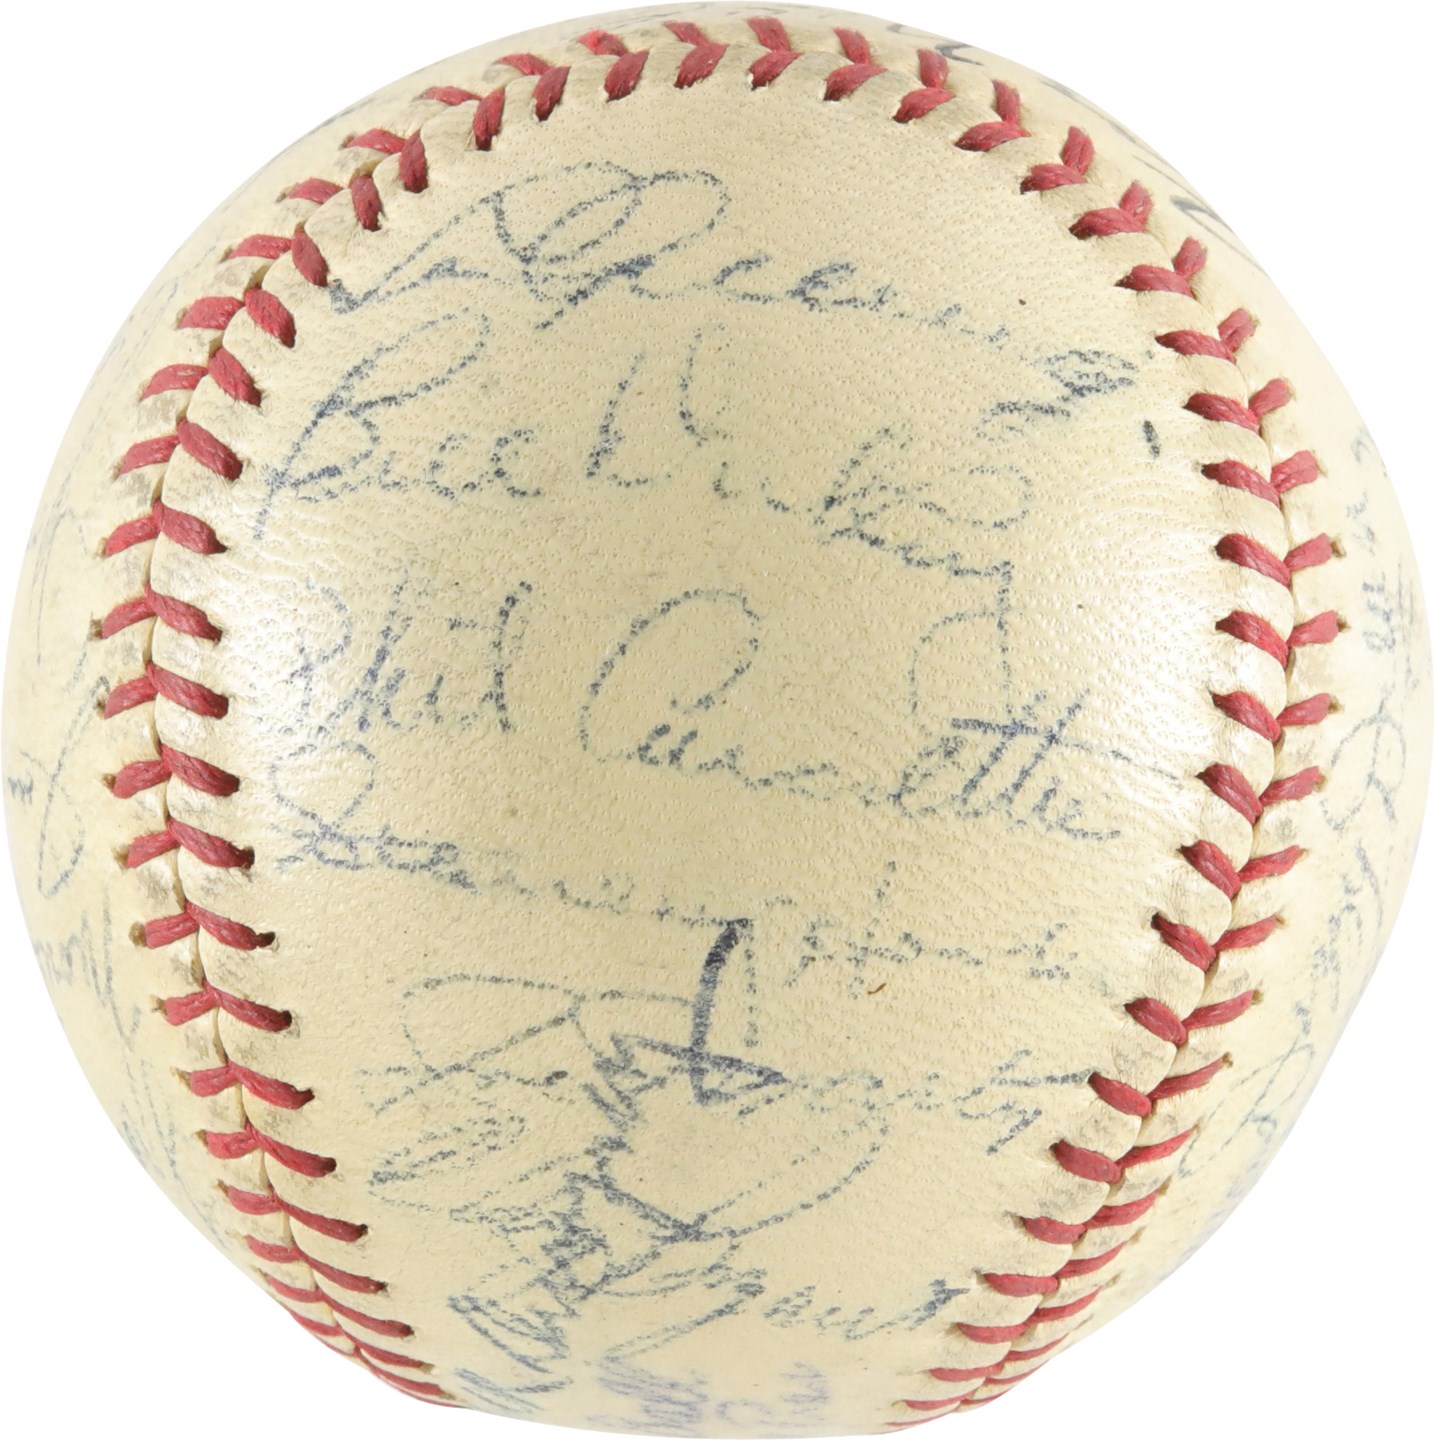 Baseball Autographs - 1938 New York Yankees World Champions Team-Signed Baseball with Gehrig & DiMaggio Plus Dizzy Dean and Other Cubs Players - Signed at the World Series (PSA)